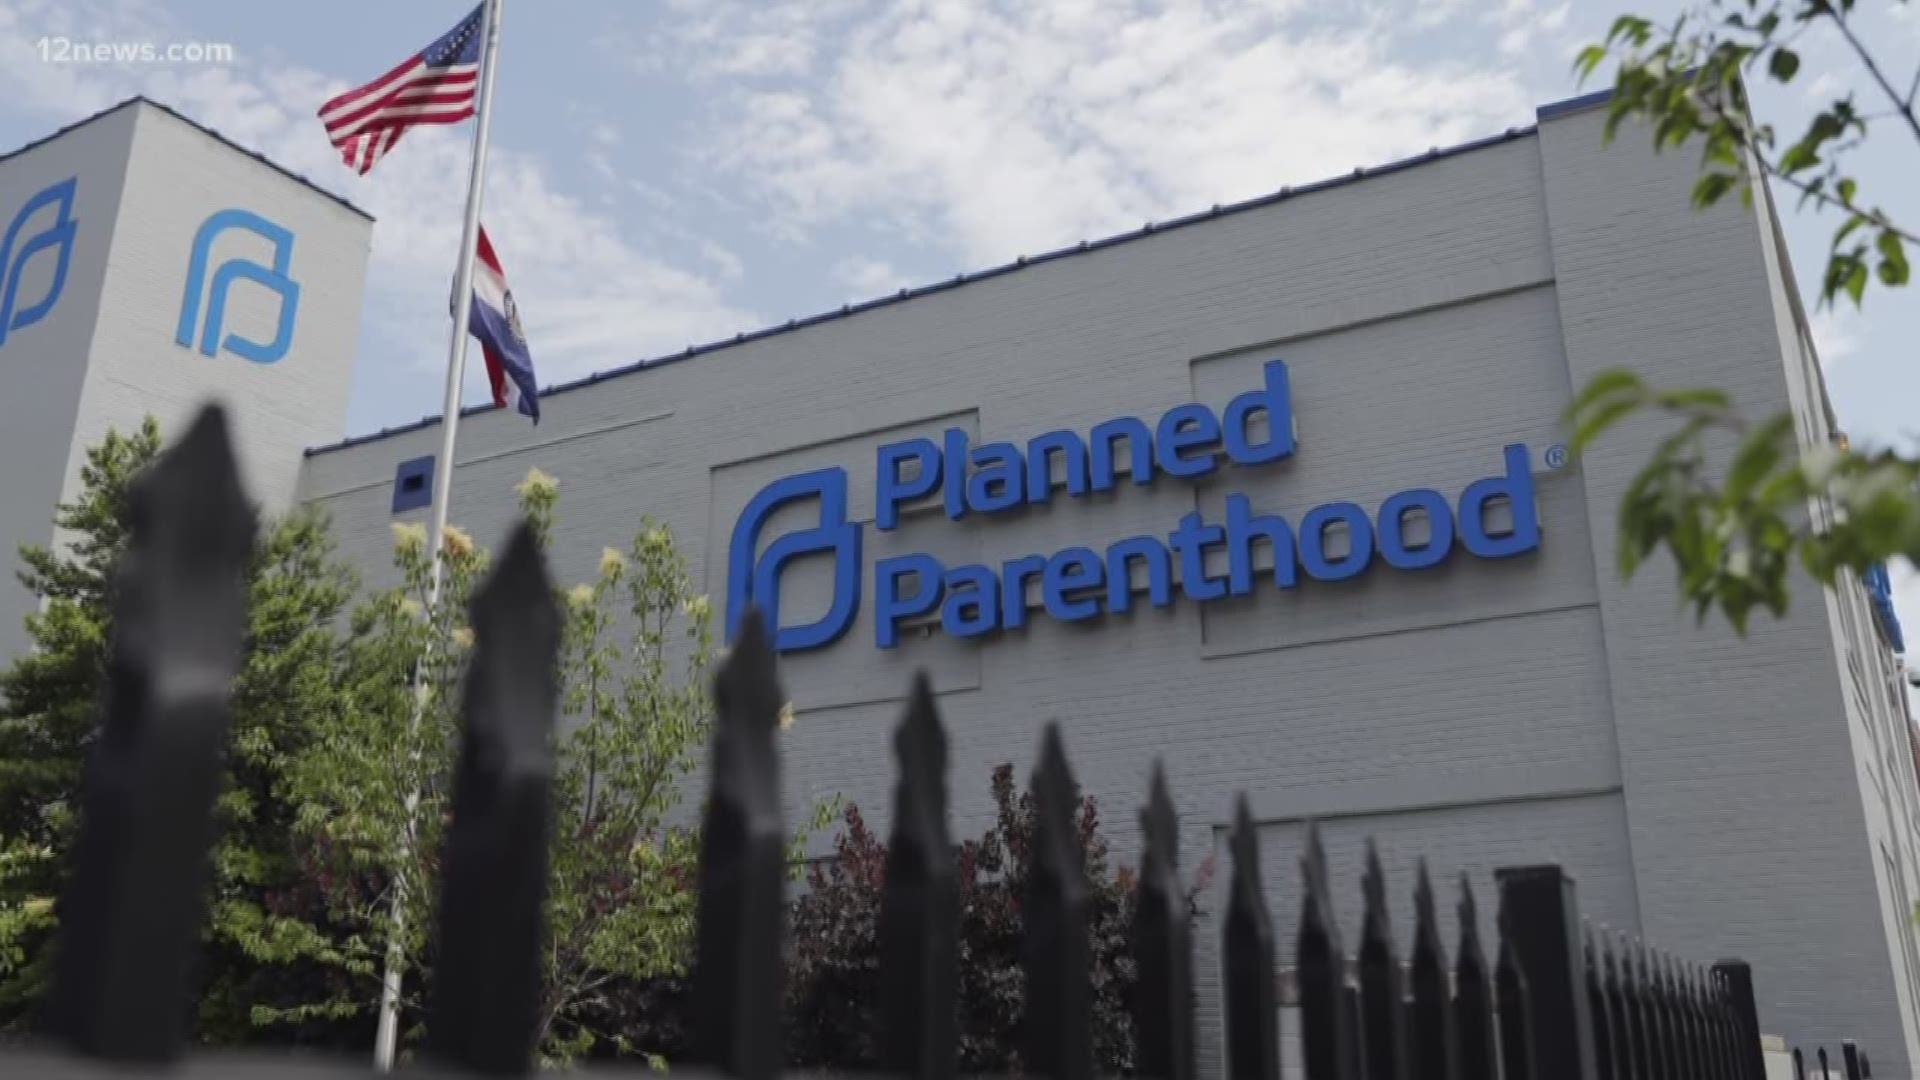 The Arizona Department of Health and Human Services announced Tuesday it would no longer allow certain programs getting federal funds to refer patients to abortion clinics. This rule change could affect as many as 20,000 Arizonans, causing them to pay more for family planning services or go without care altogether.